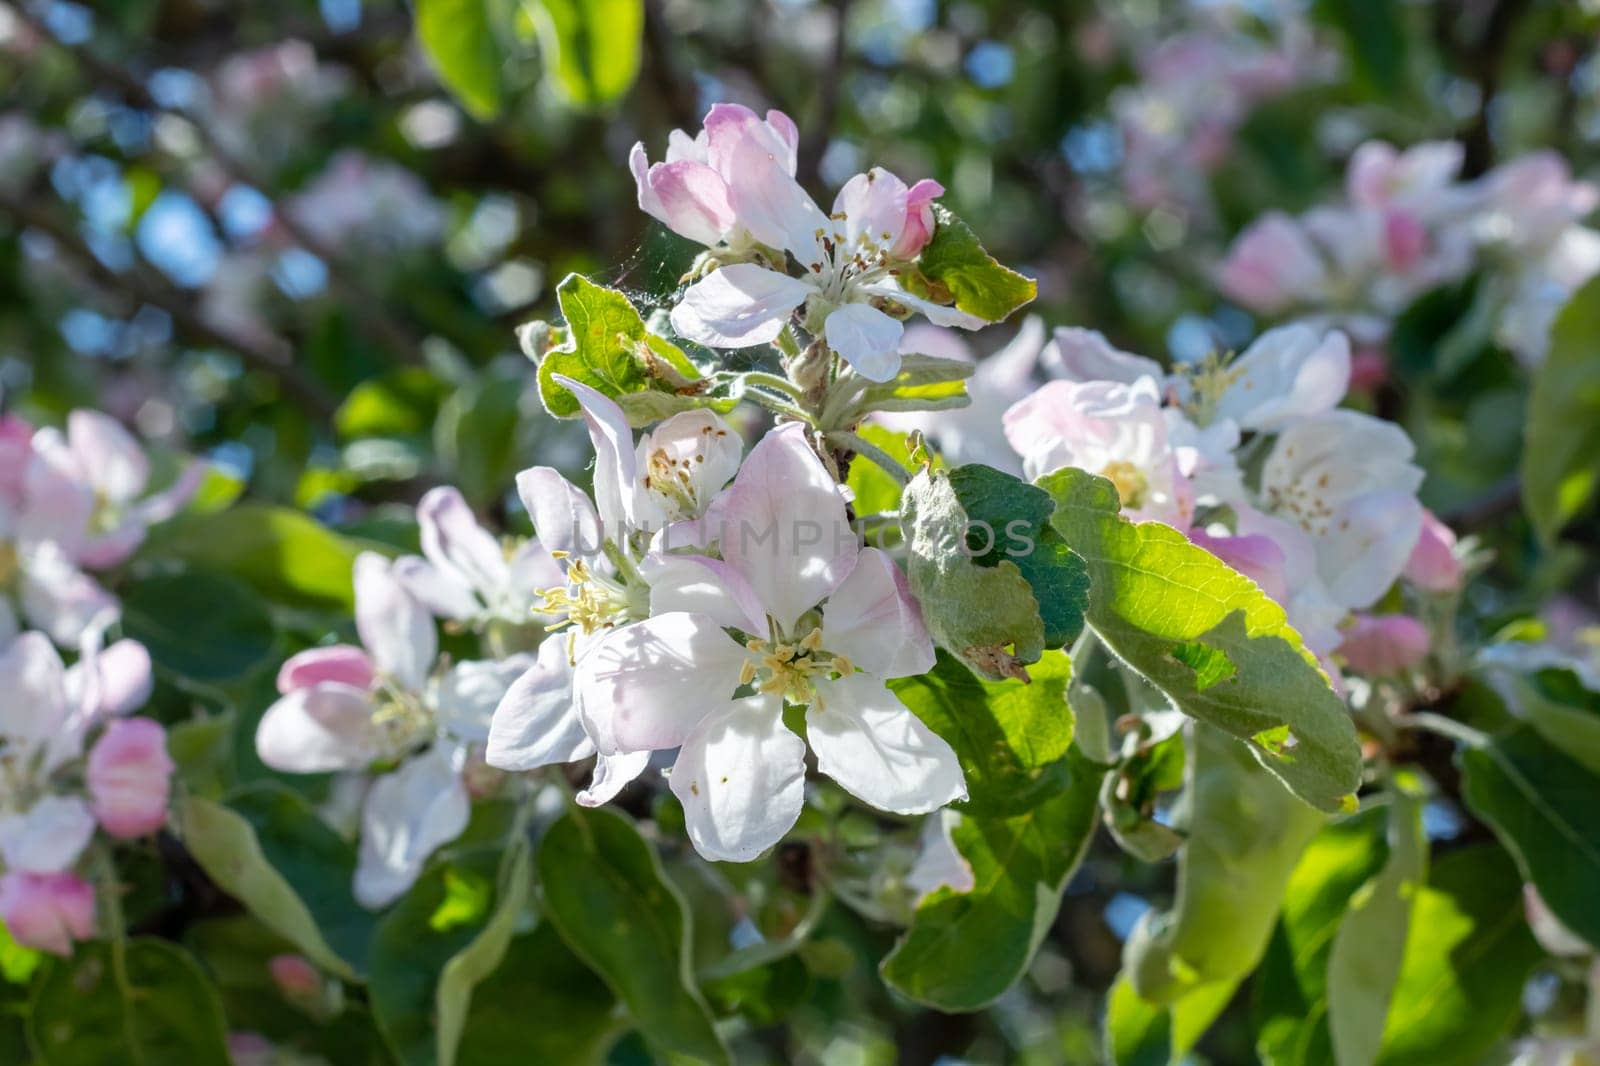 White flowers on the branches of an apple tree